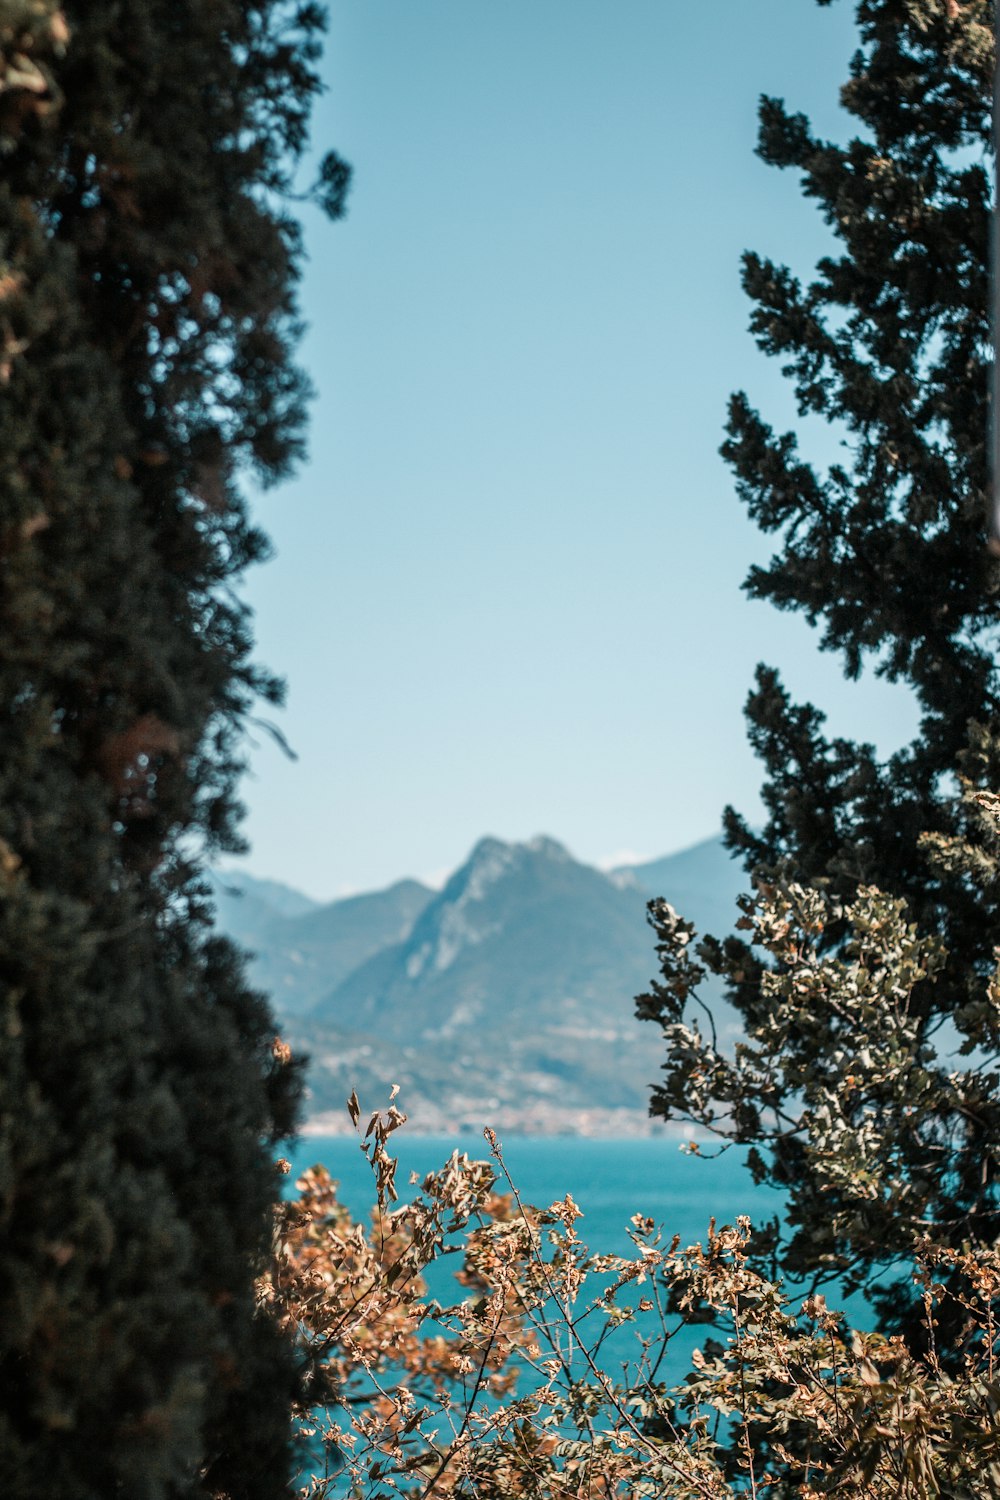 a view of a mountain and a lake from a tree